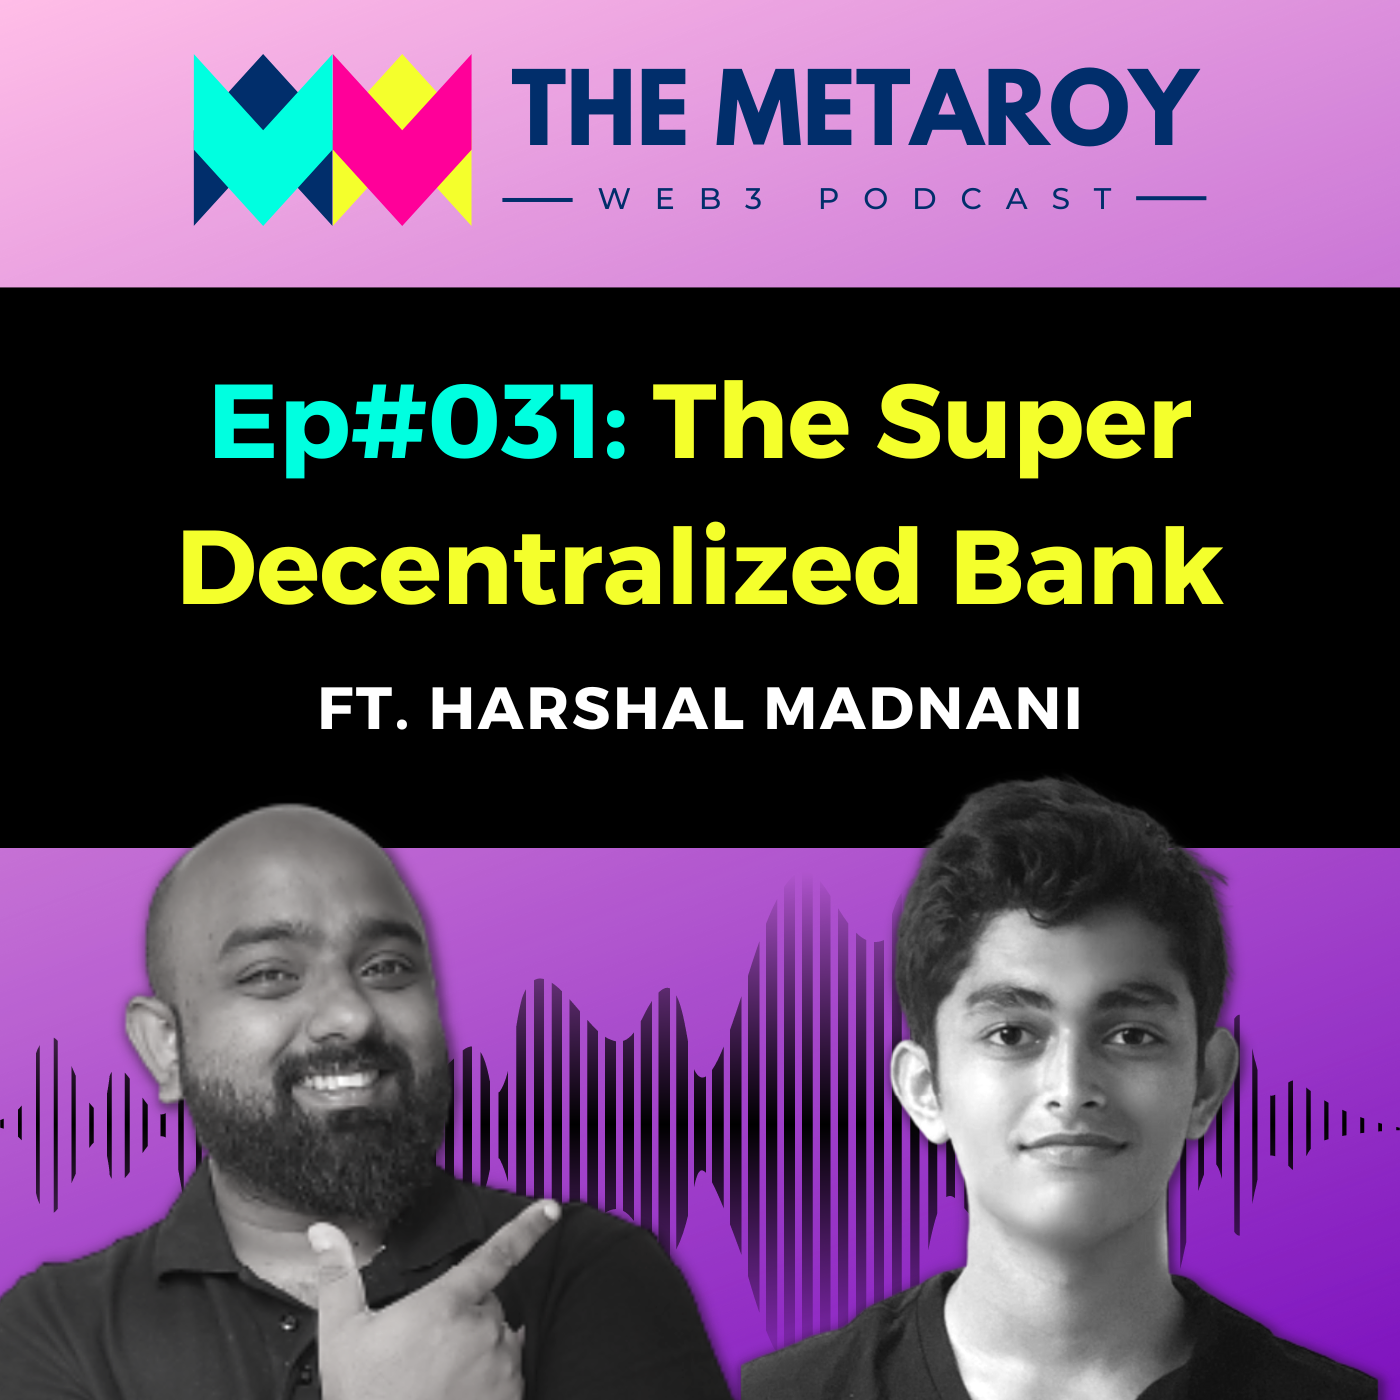 Harshal Madnani: The Super Decentralized Bank | Ep #031